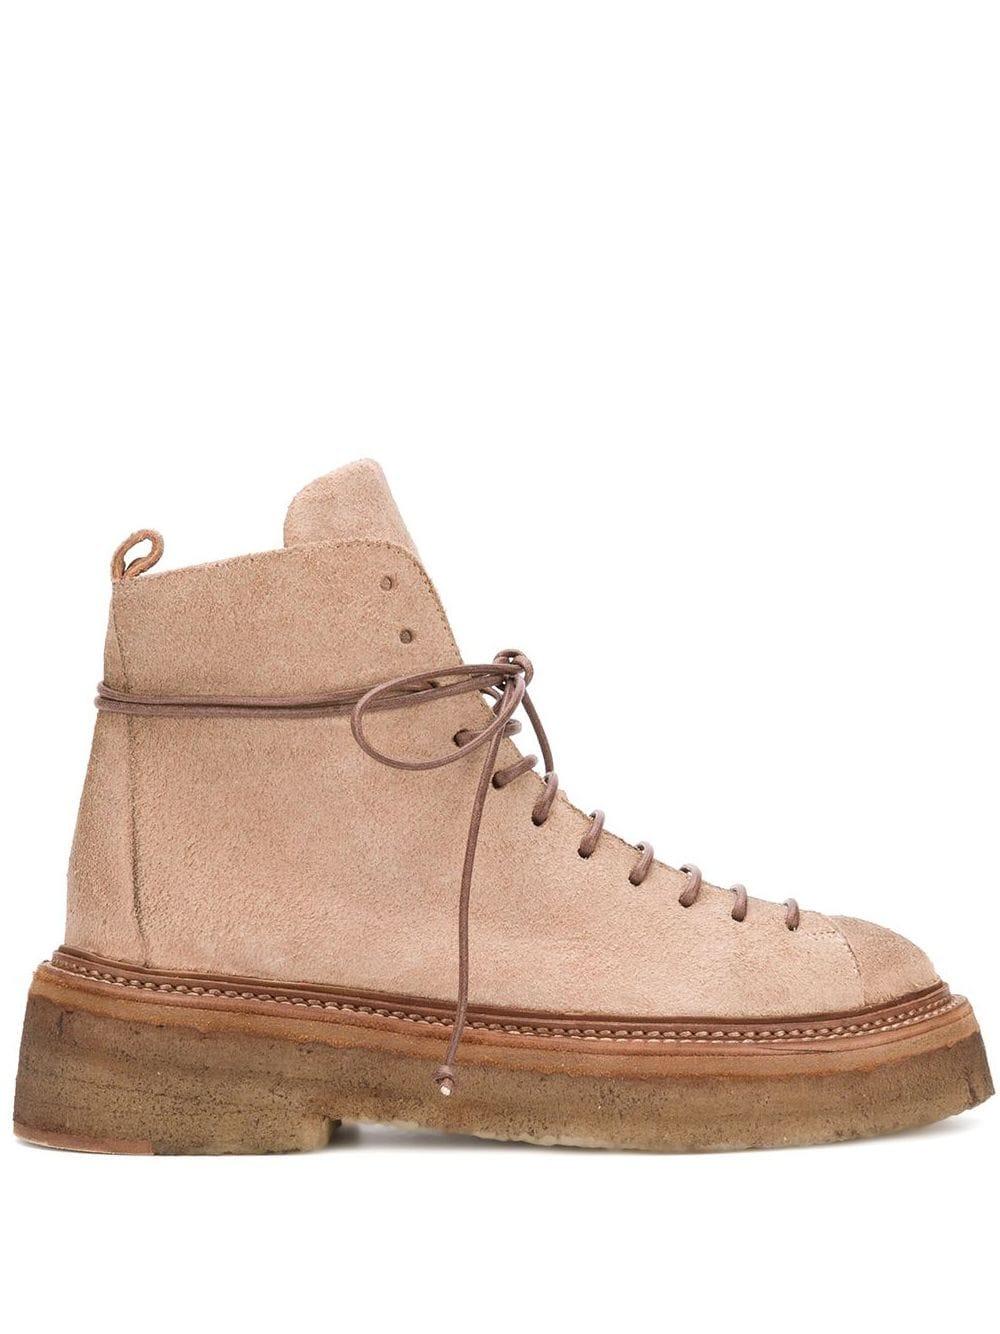 Marsèll Thick-sole Combat Boots in Brown - Lyst